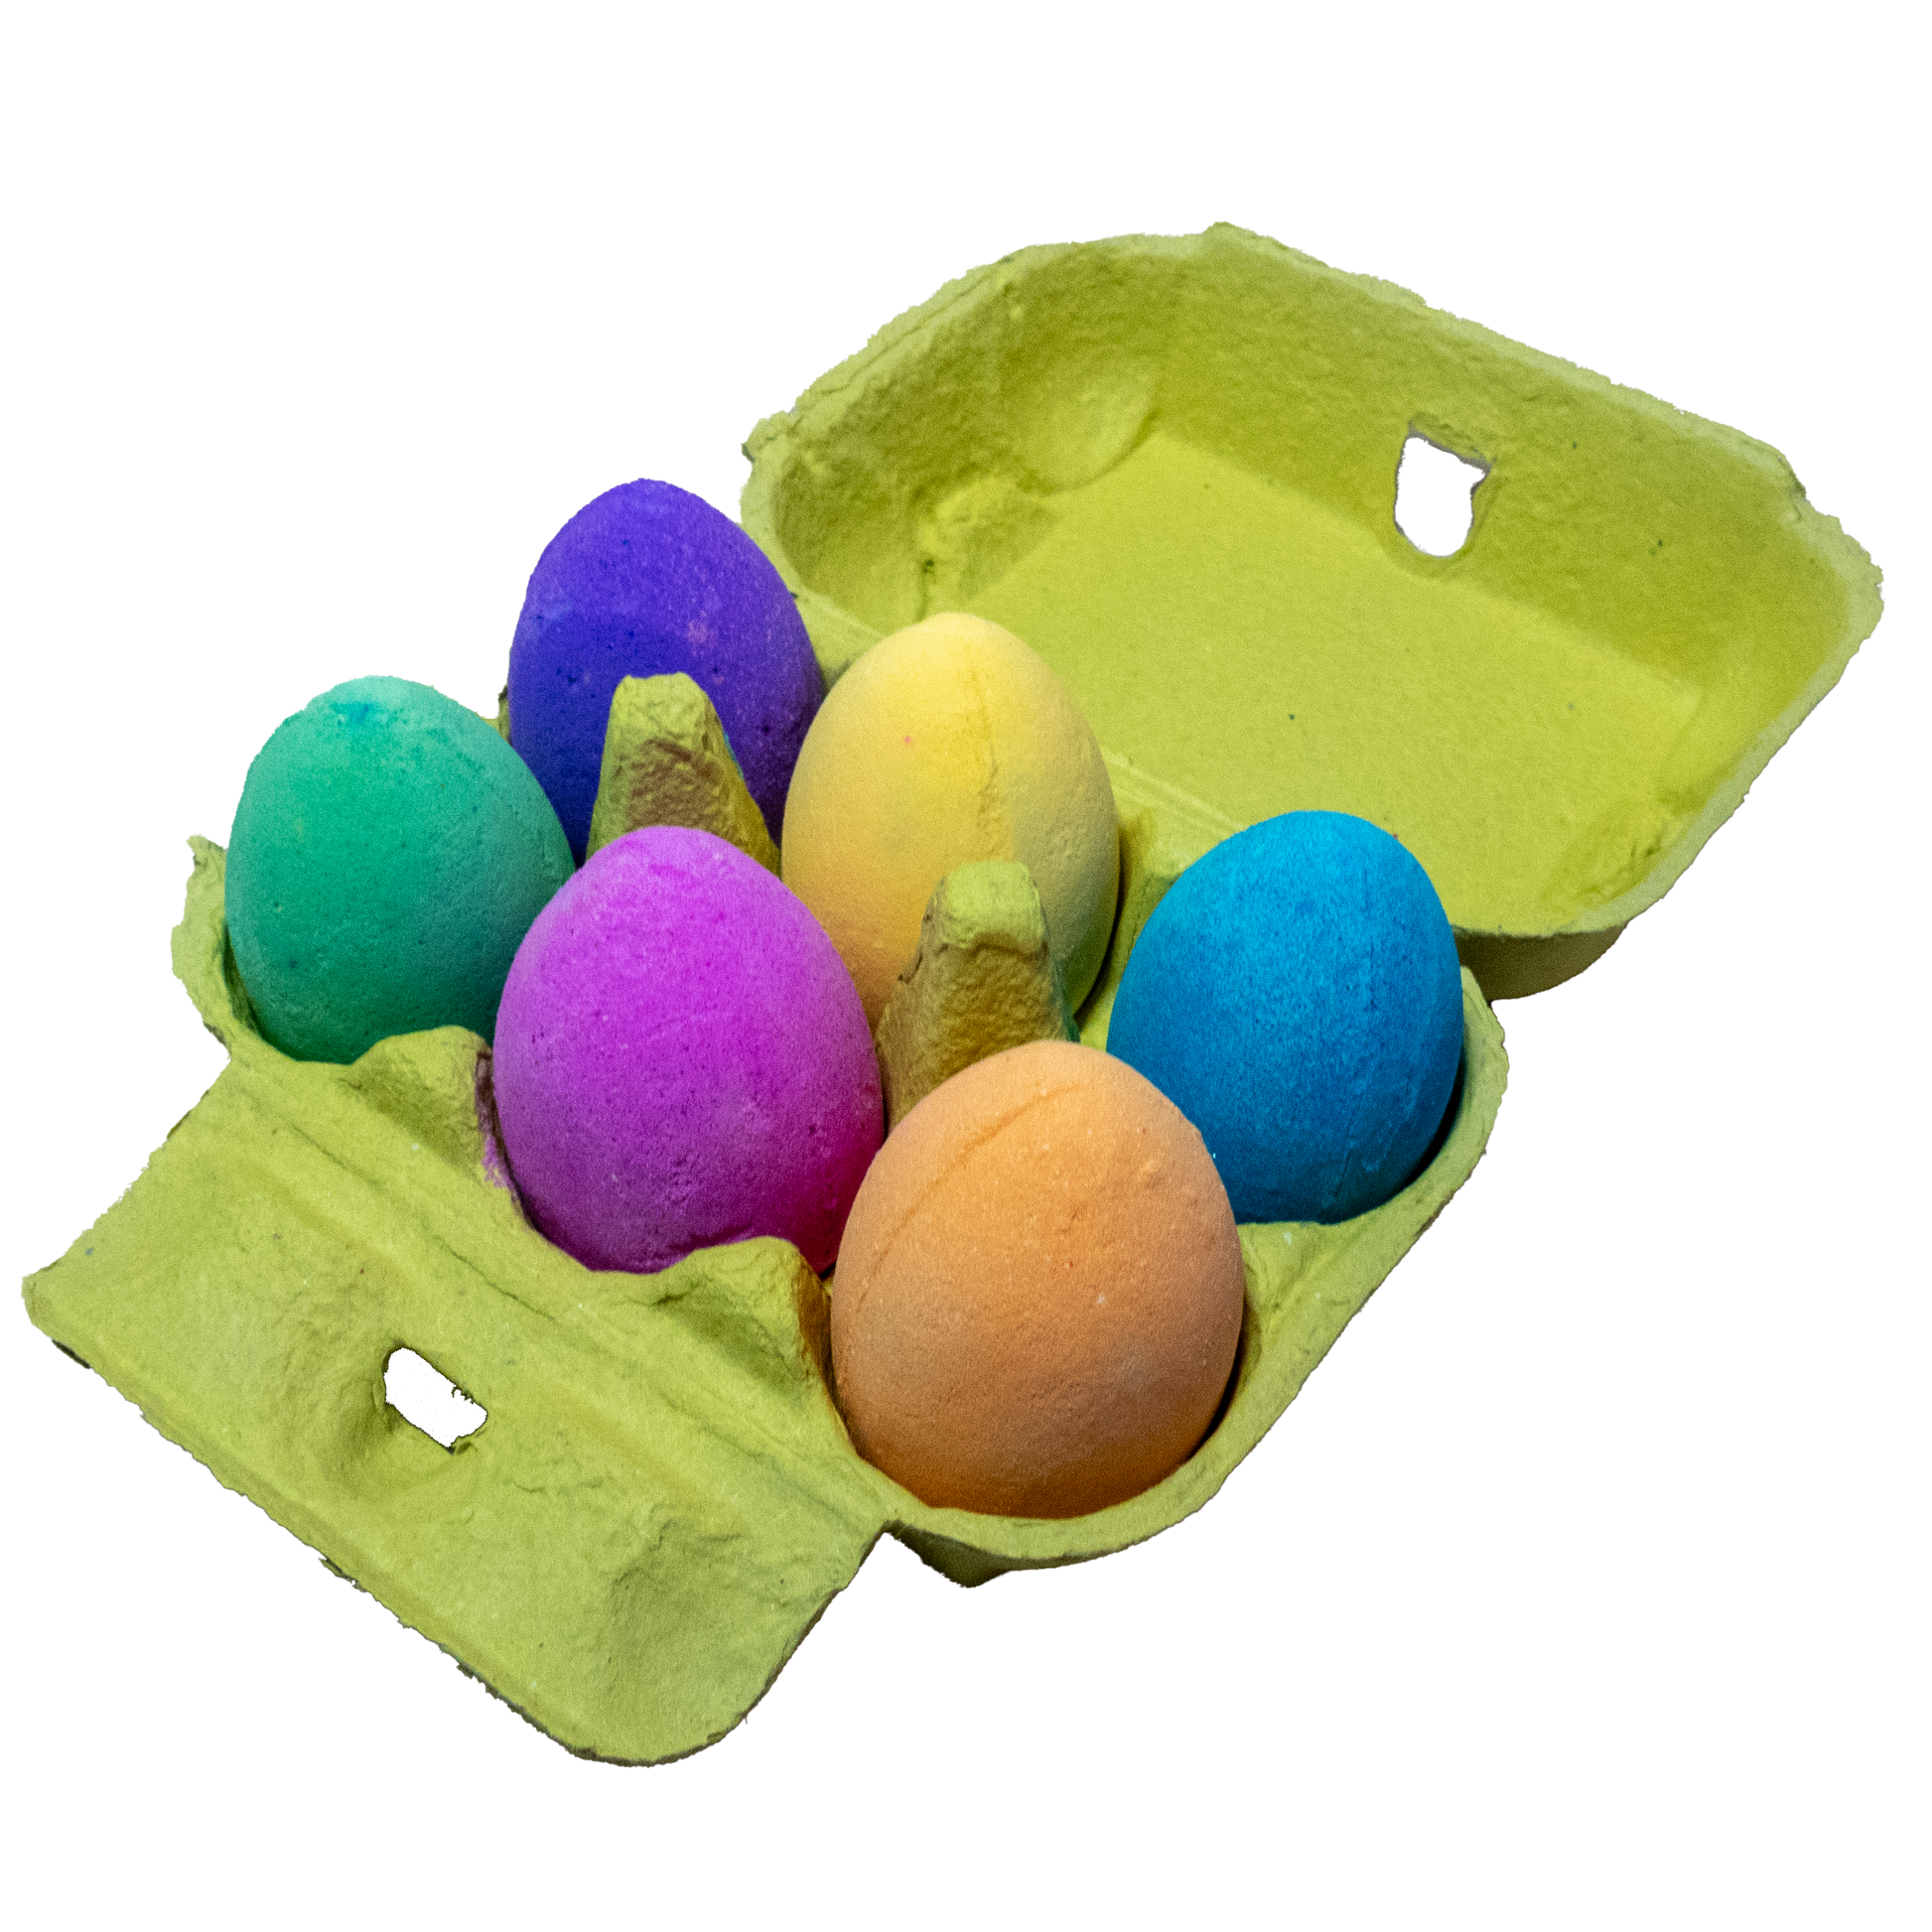 6 Bright coloured egg shaped bath bombs displayed in an open yellow egg box